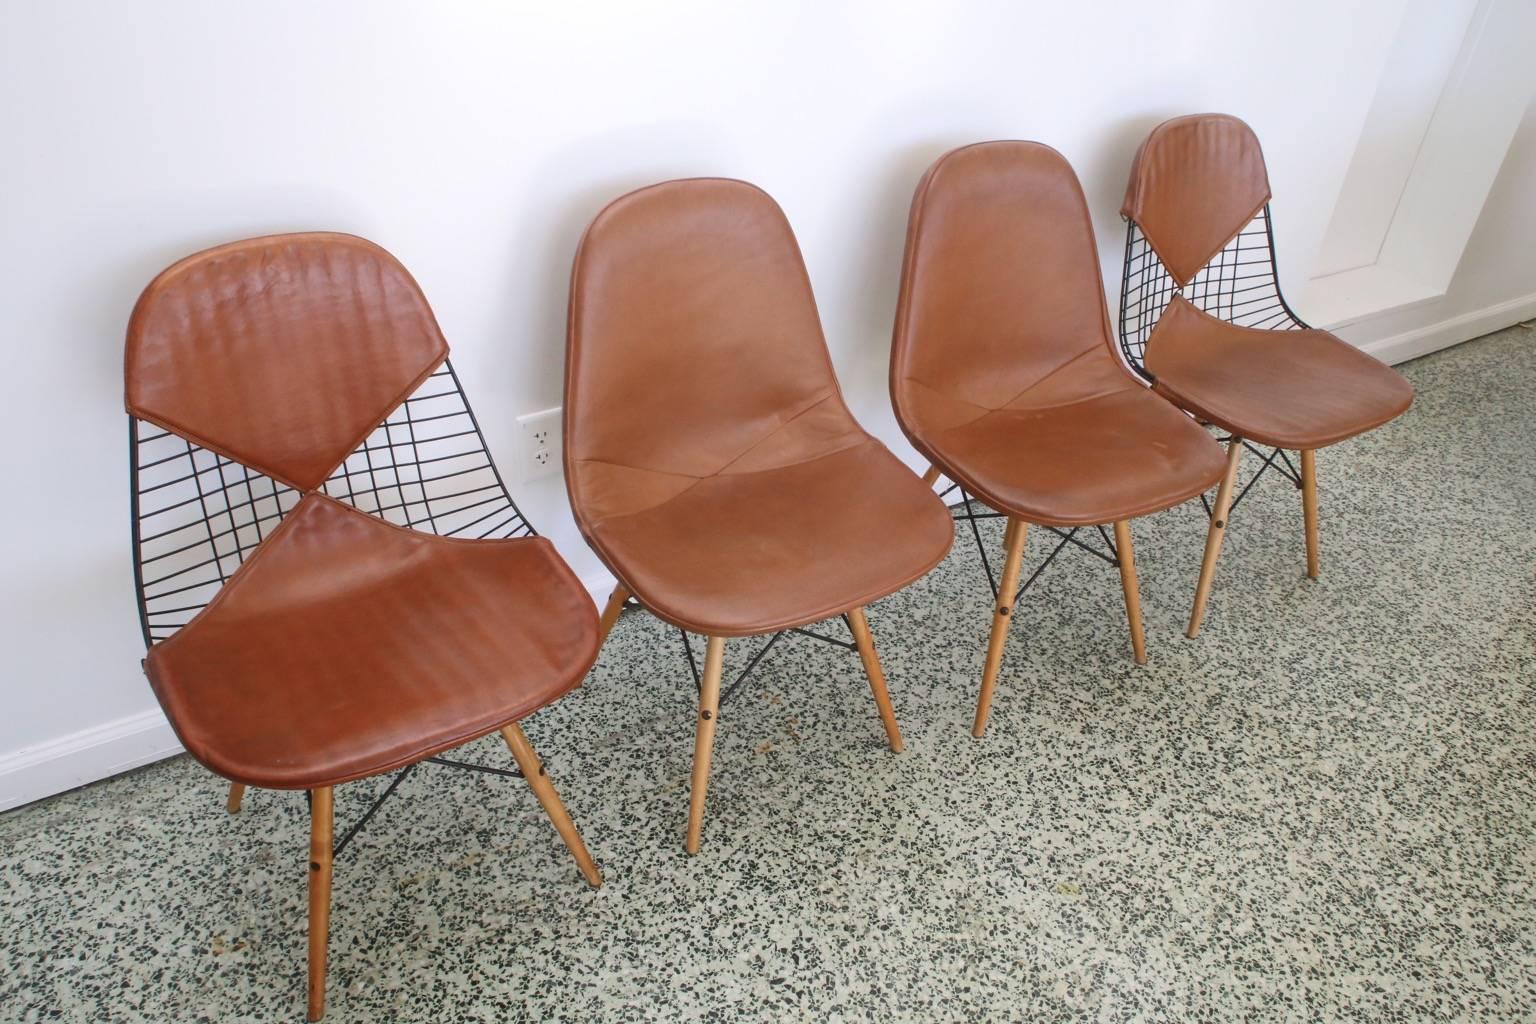 Exquisite set of four Eames birch dowel base chairs. Brown Naugahyde covers. Two bikini and two full covers. Very nice condition.